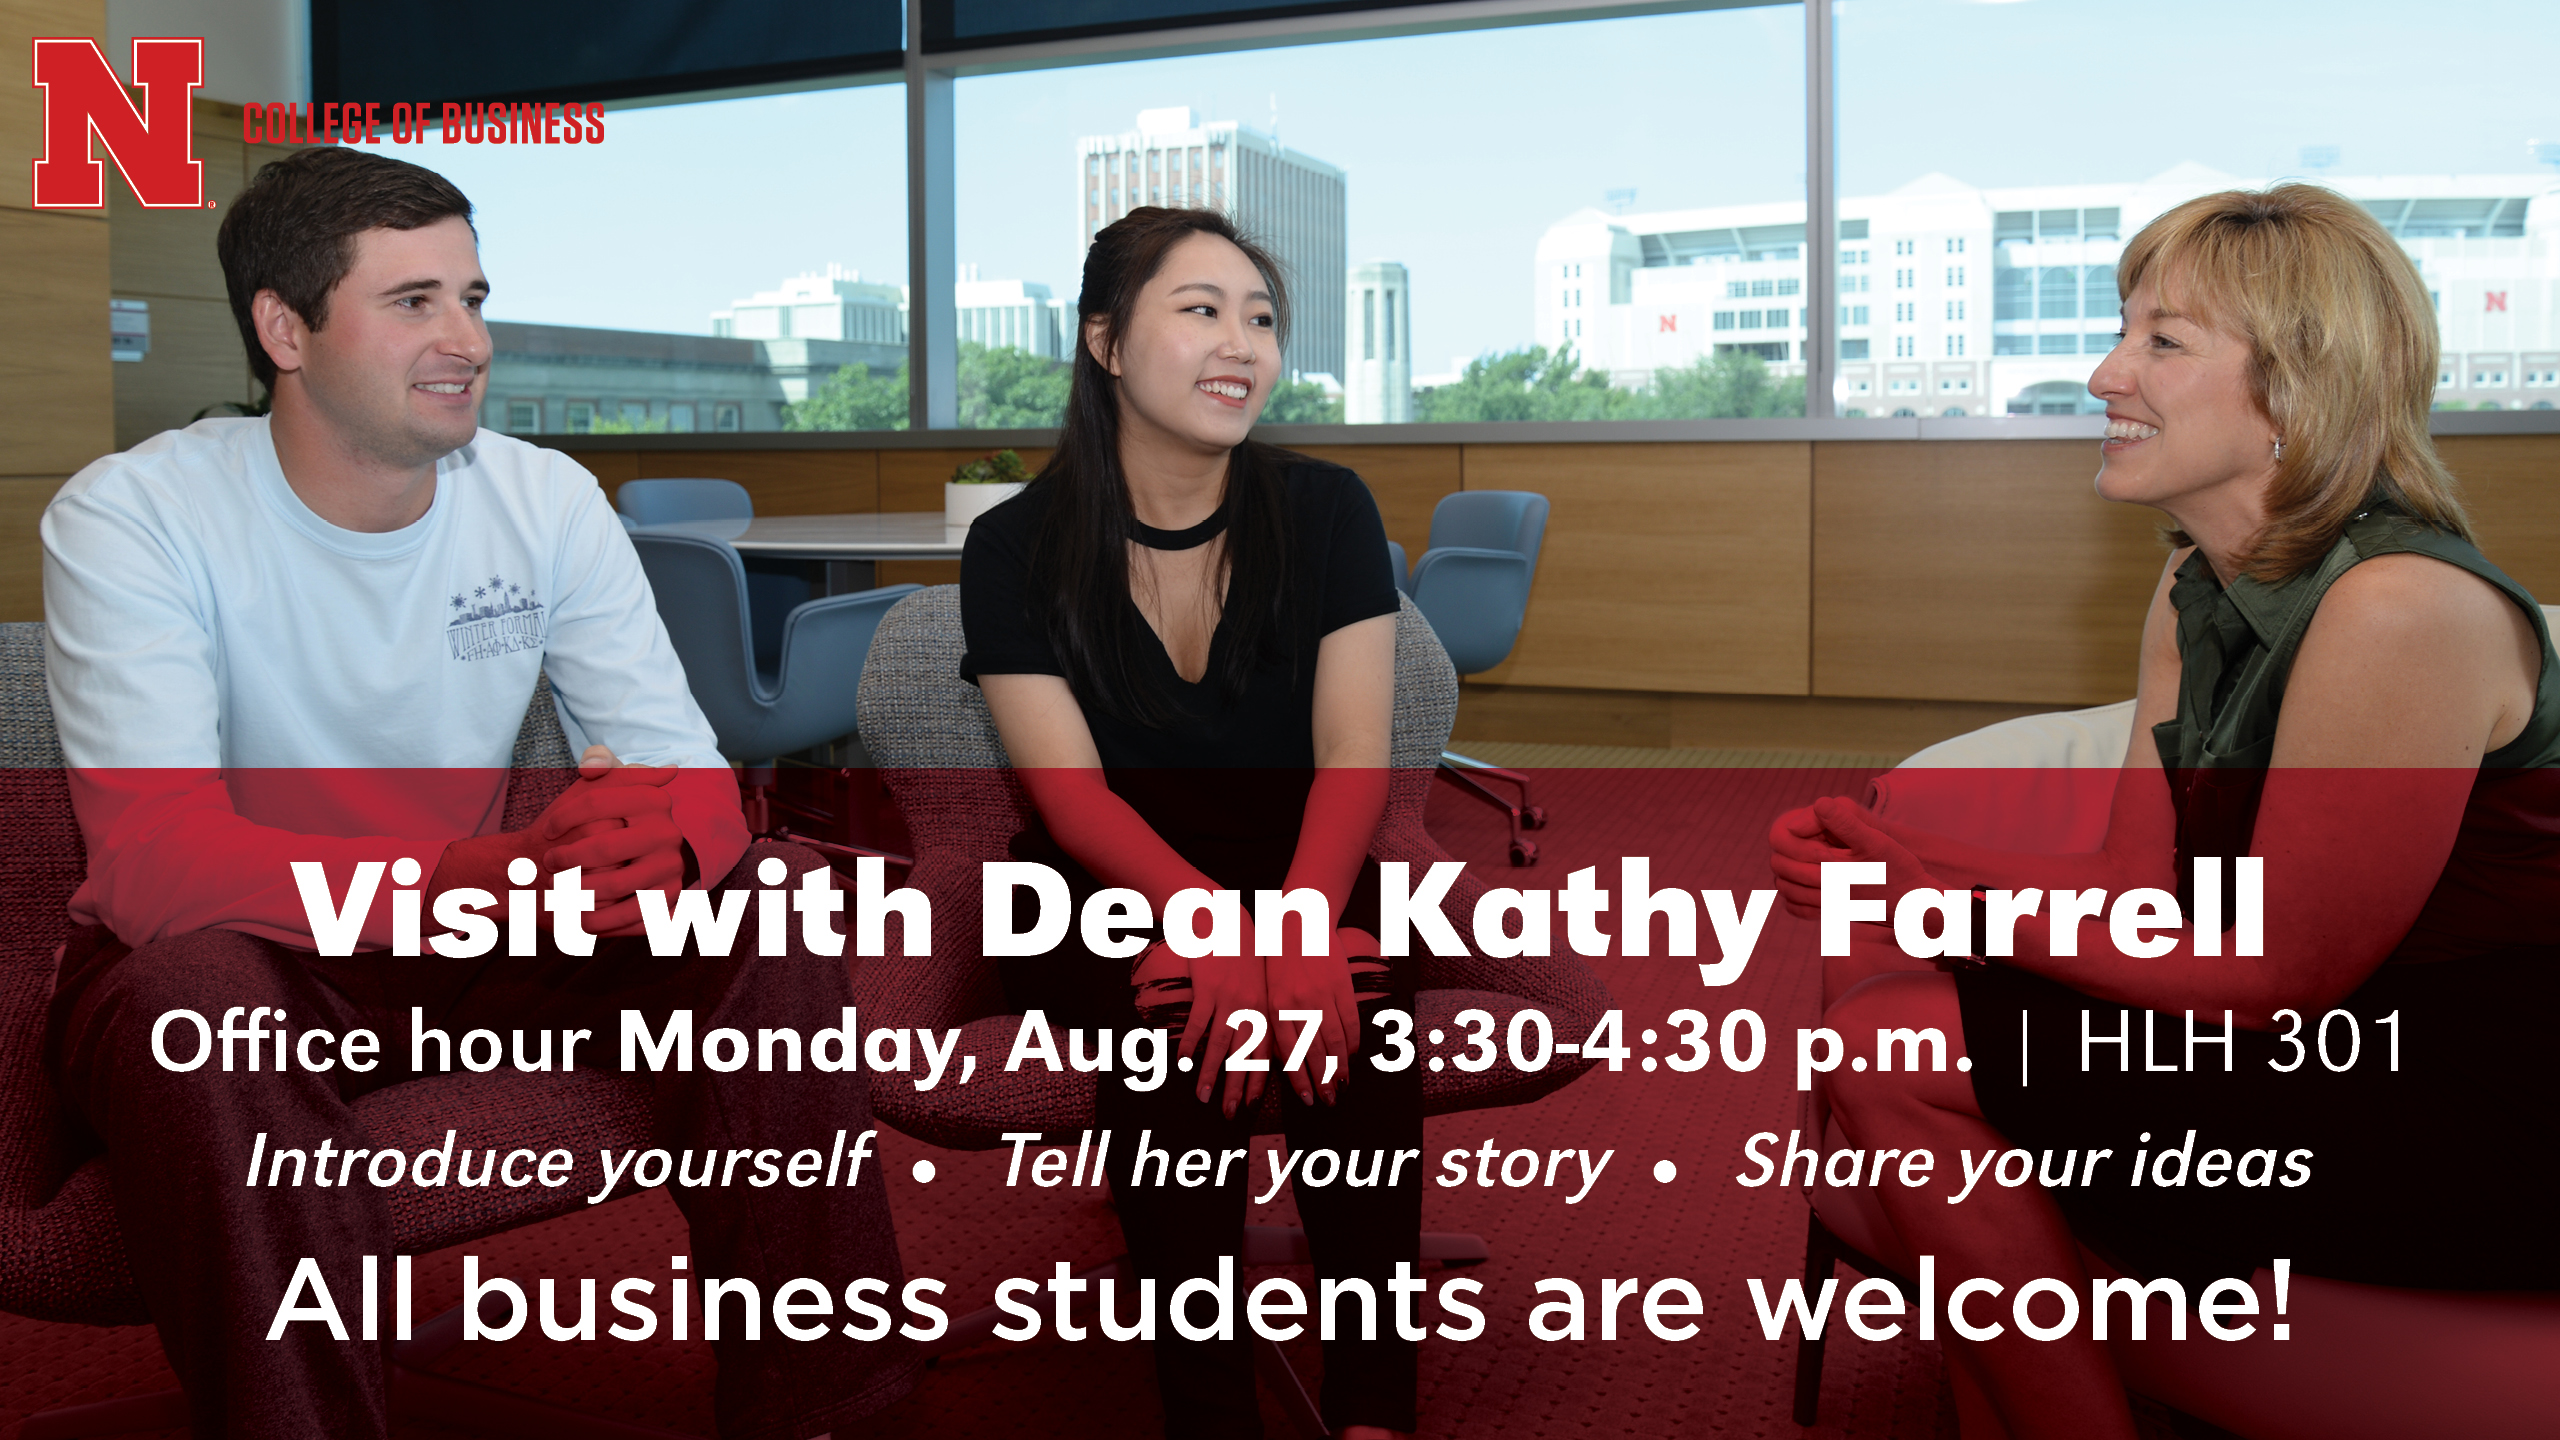 Special Dean’s Hours for Monday, Aug. 27